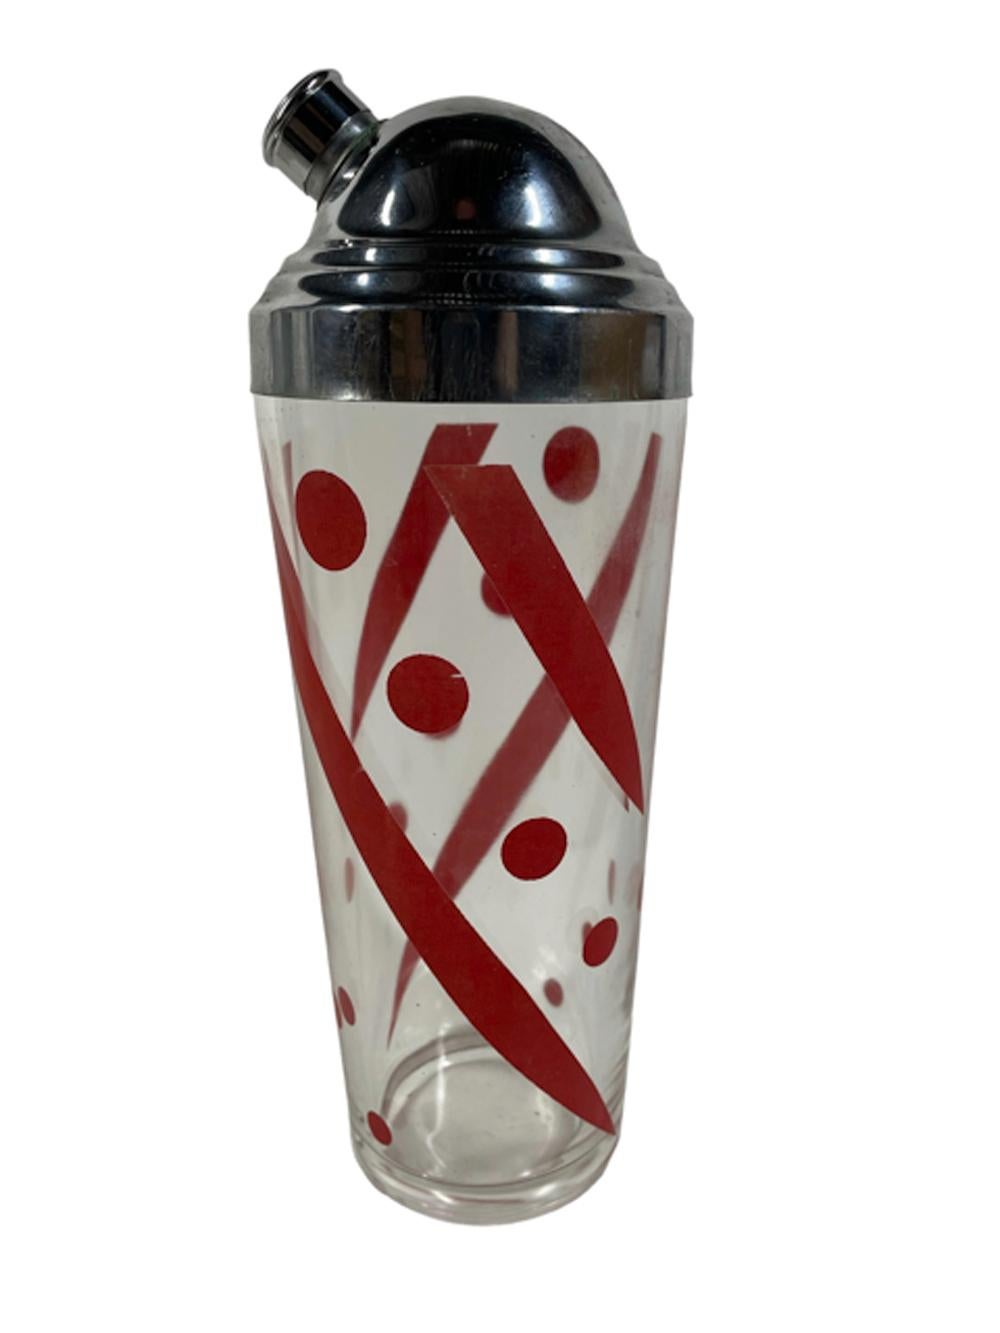 20th Century Art Deco Cocktail Shaker w/Red Geometric Design on Clear Glass & Chrome Lid For Sale